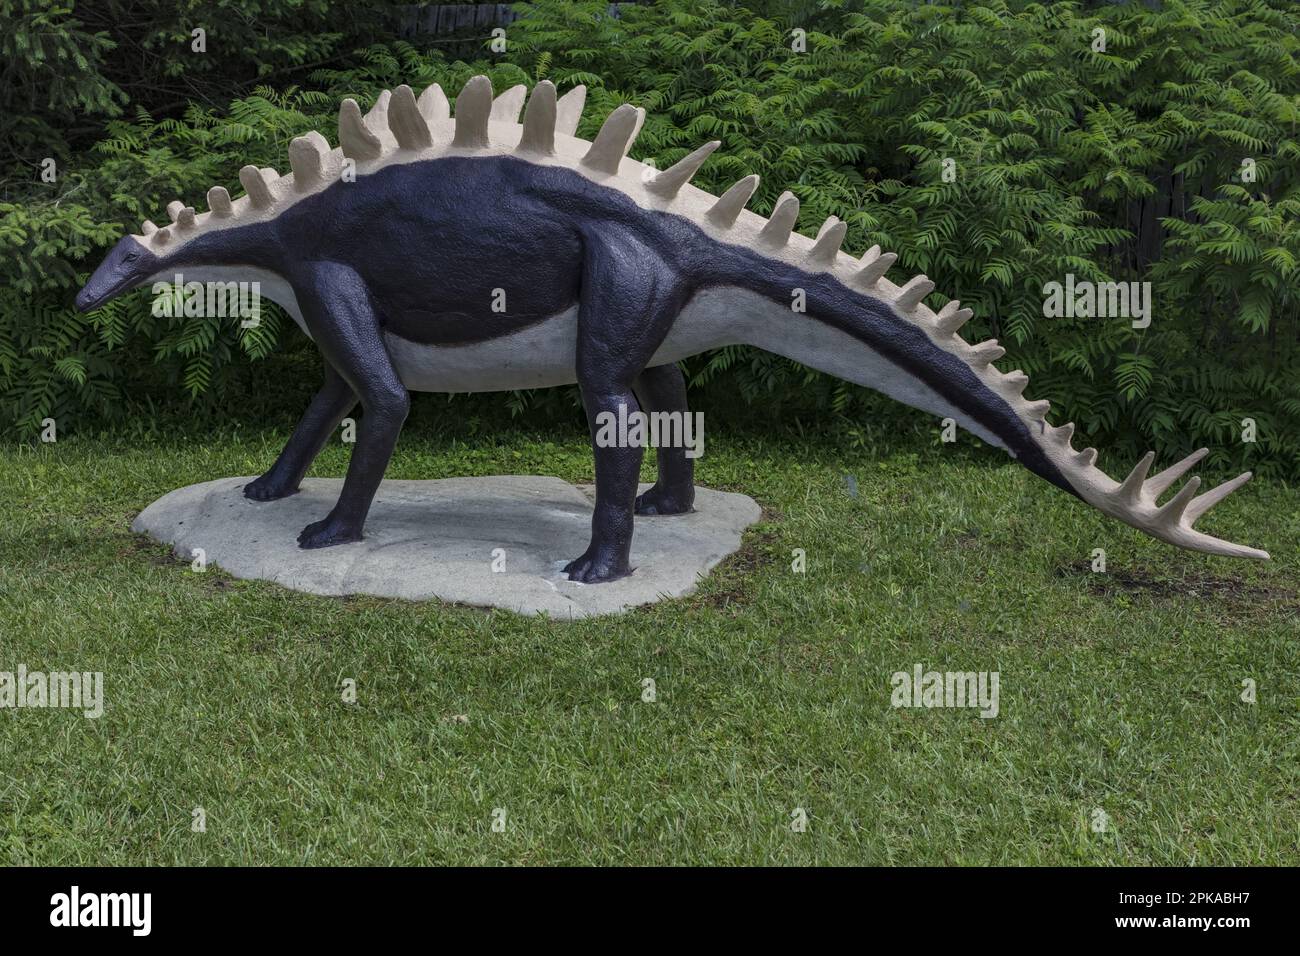 Prehistoric World in Eastern Ontario, Canada, is a multi-acre outdoor attraction that features over 50 life-sized models. Stock Photo